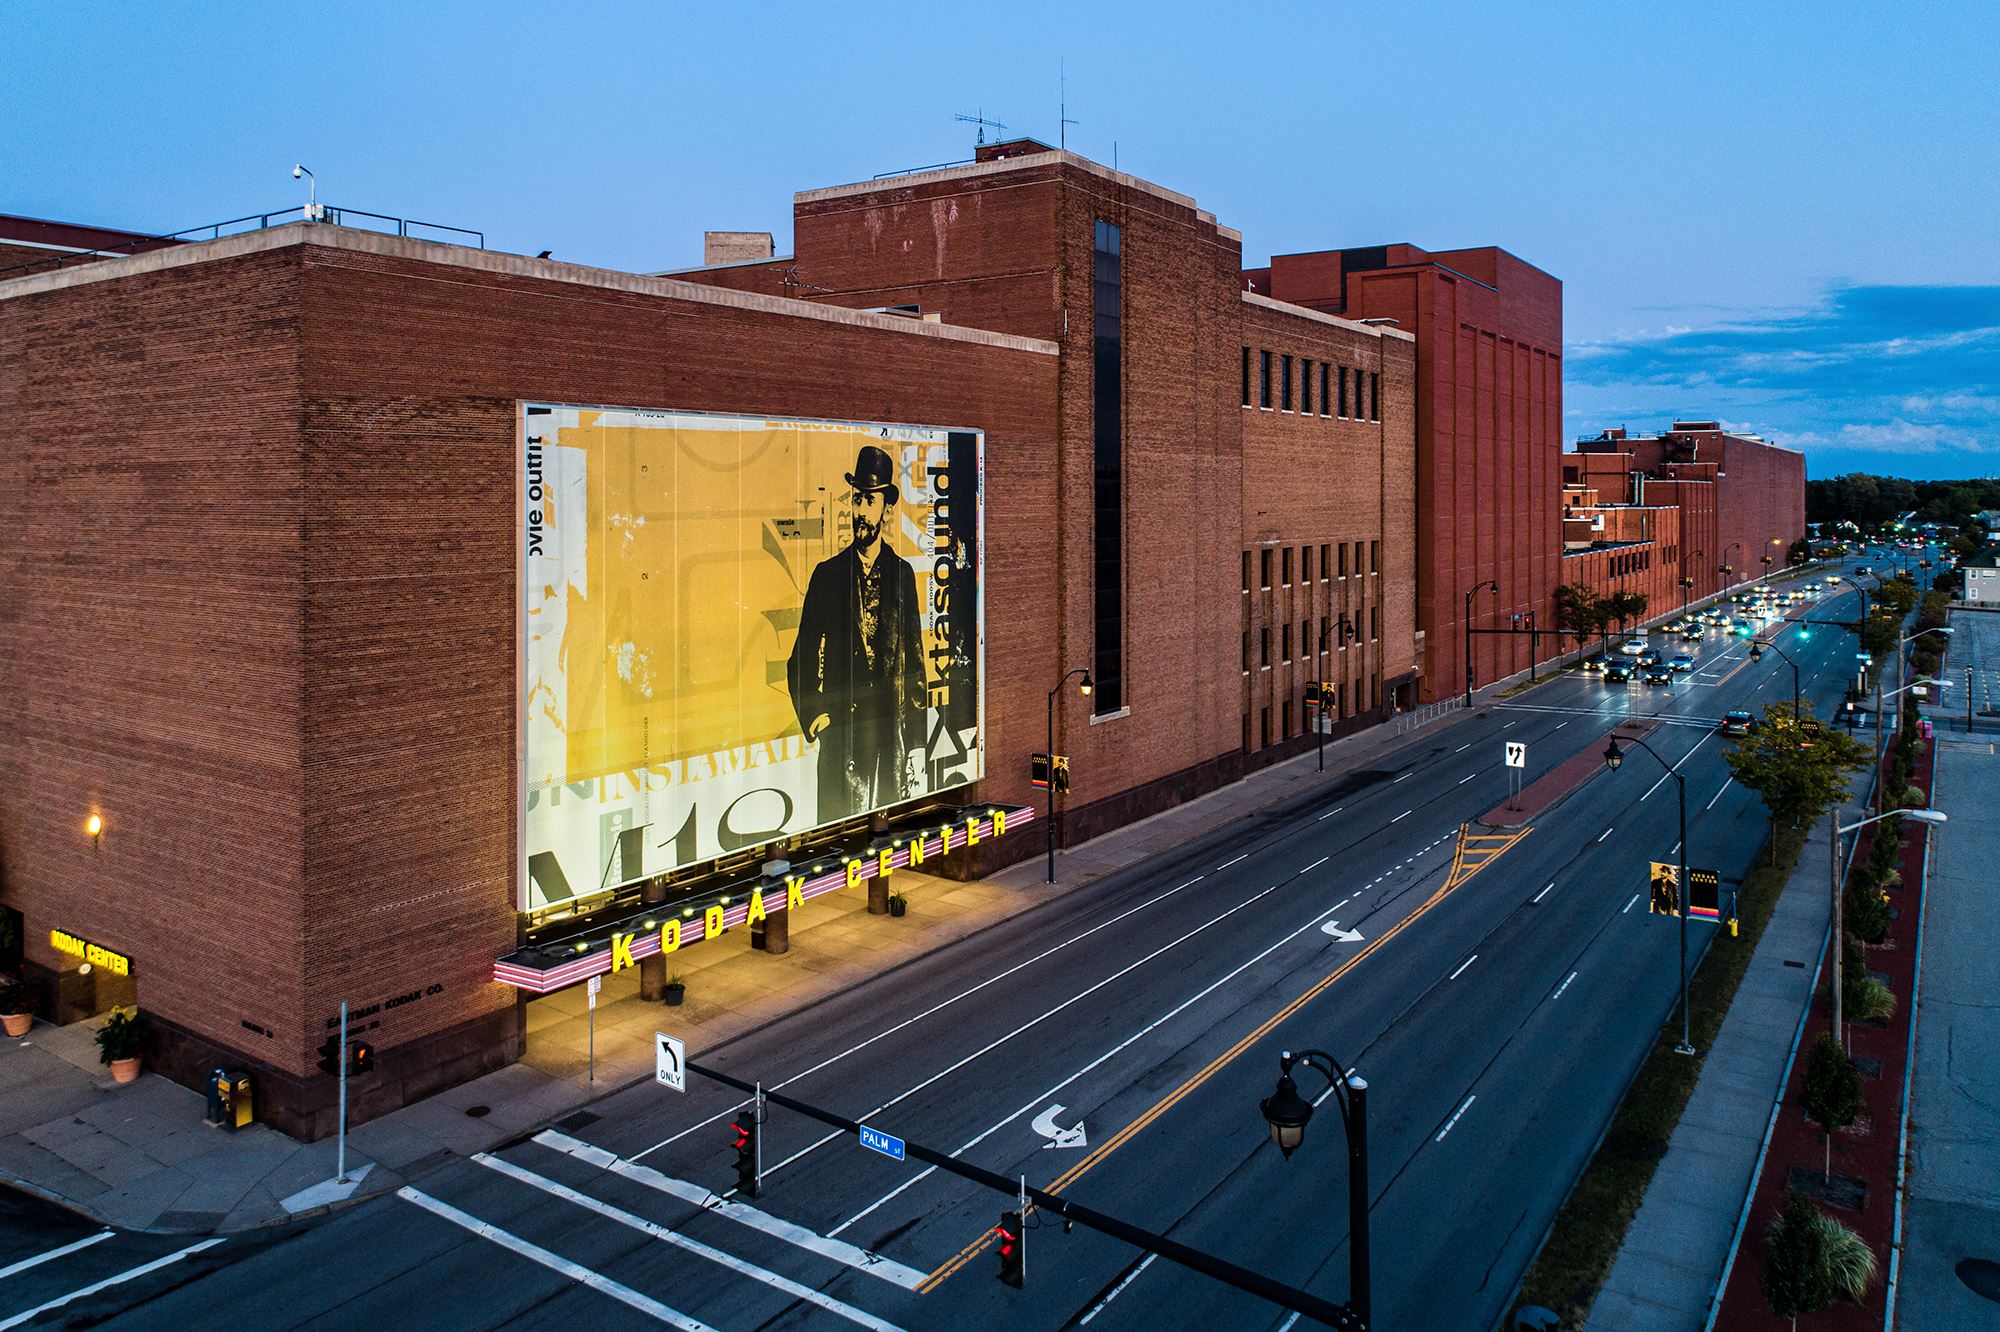 Plan Your Visit to Kodak Center in Rochester, NY